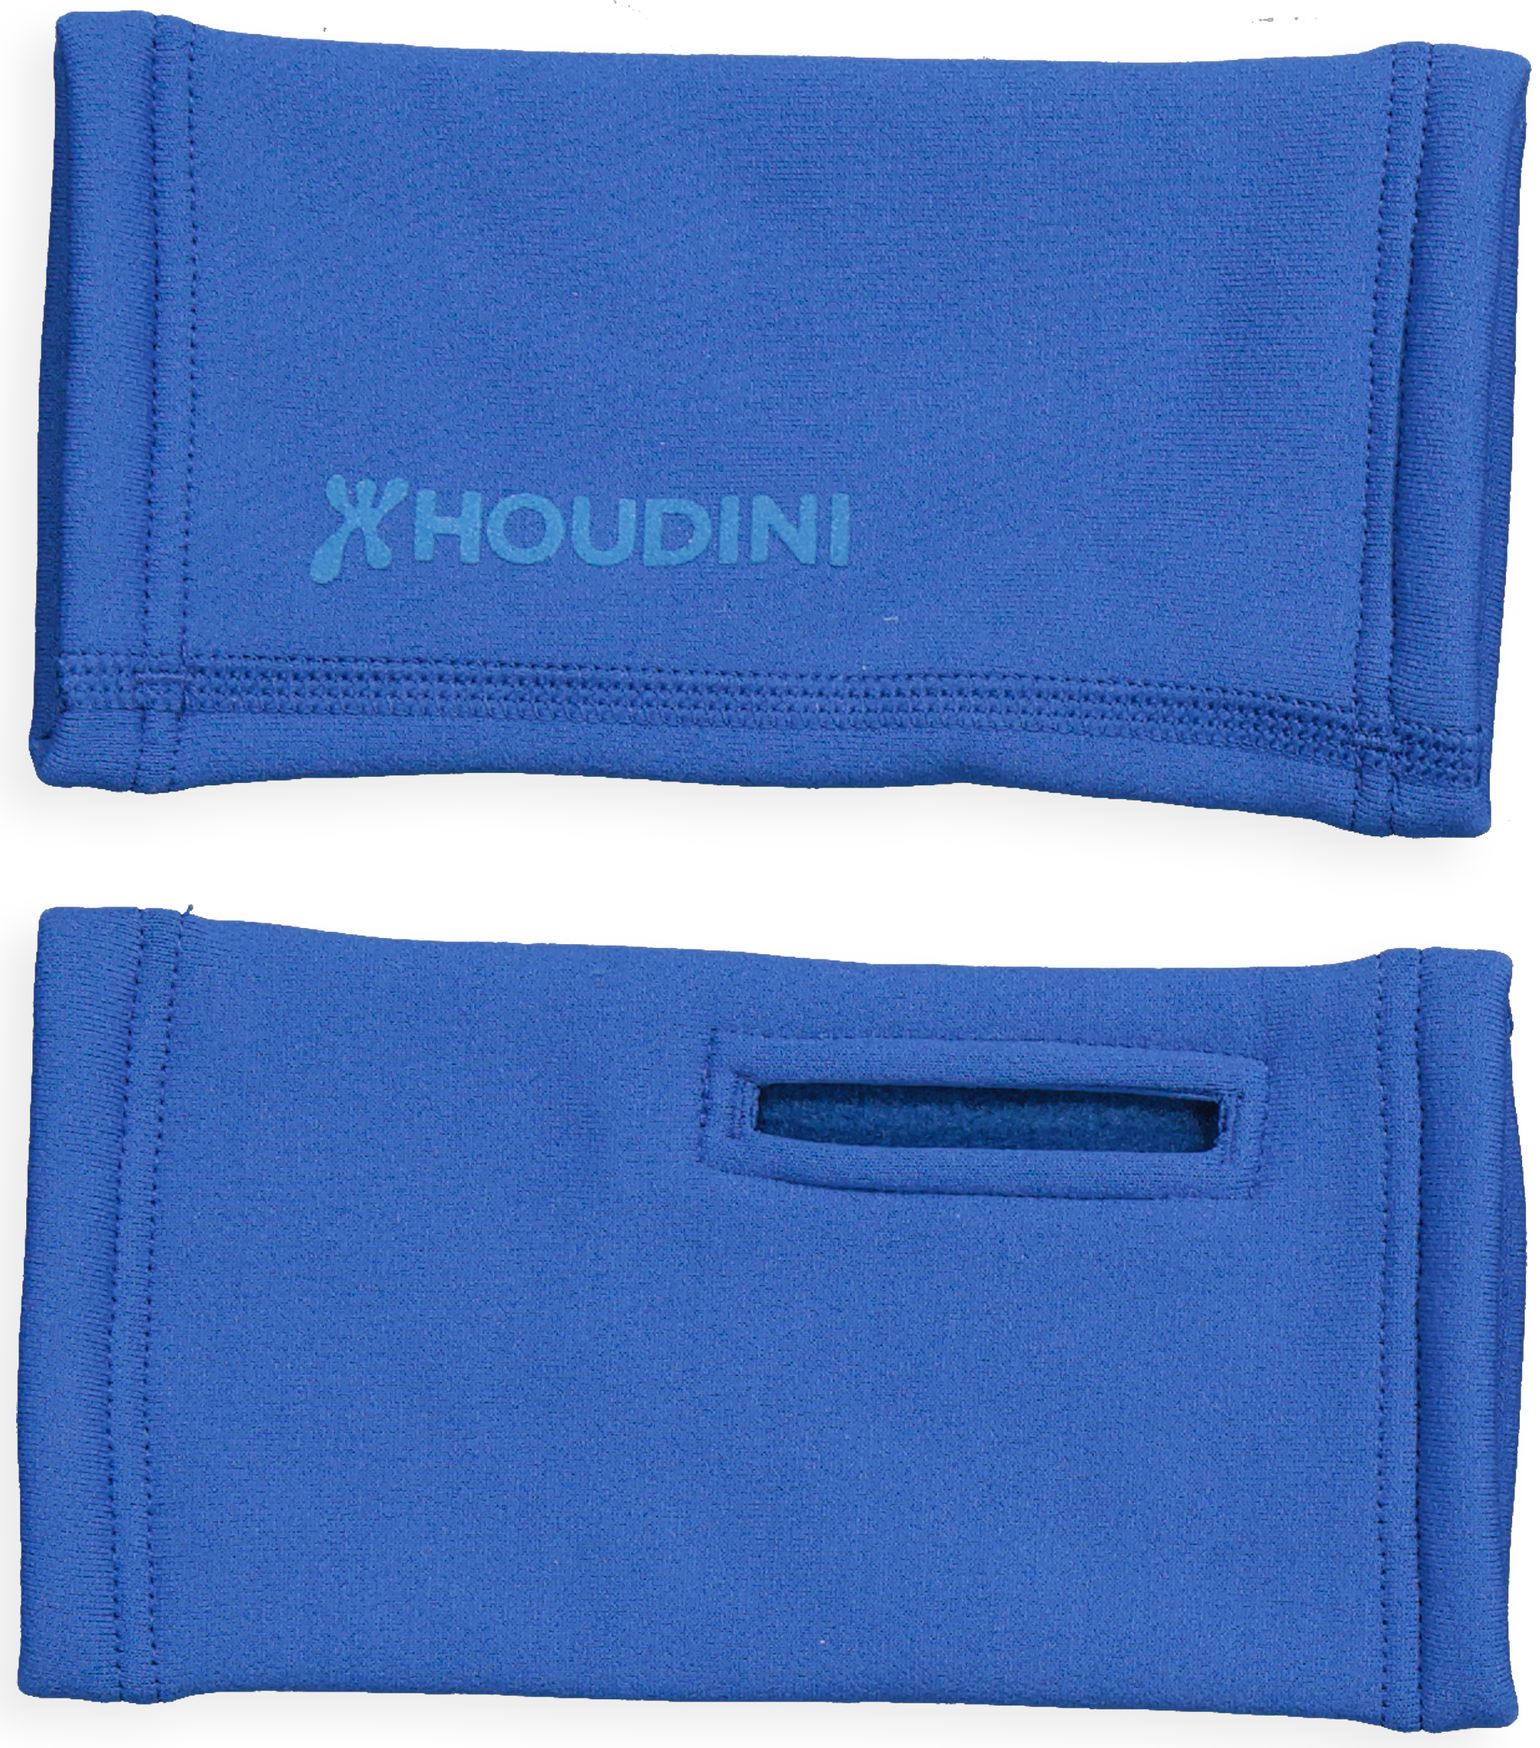 Houdini Power Wrist Gaiters Out Of The Blue